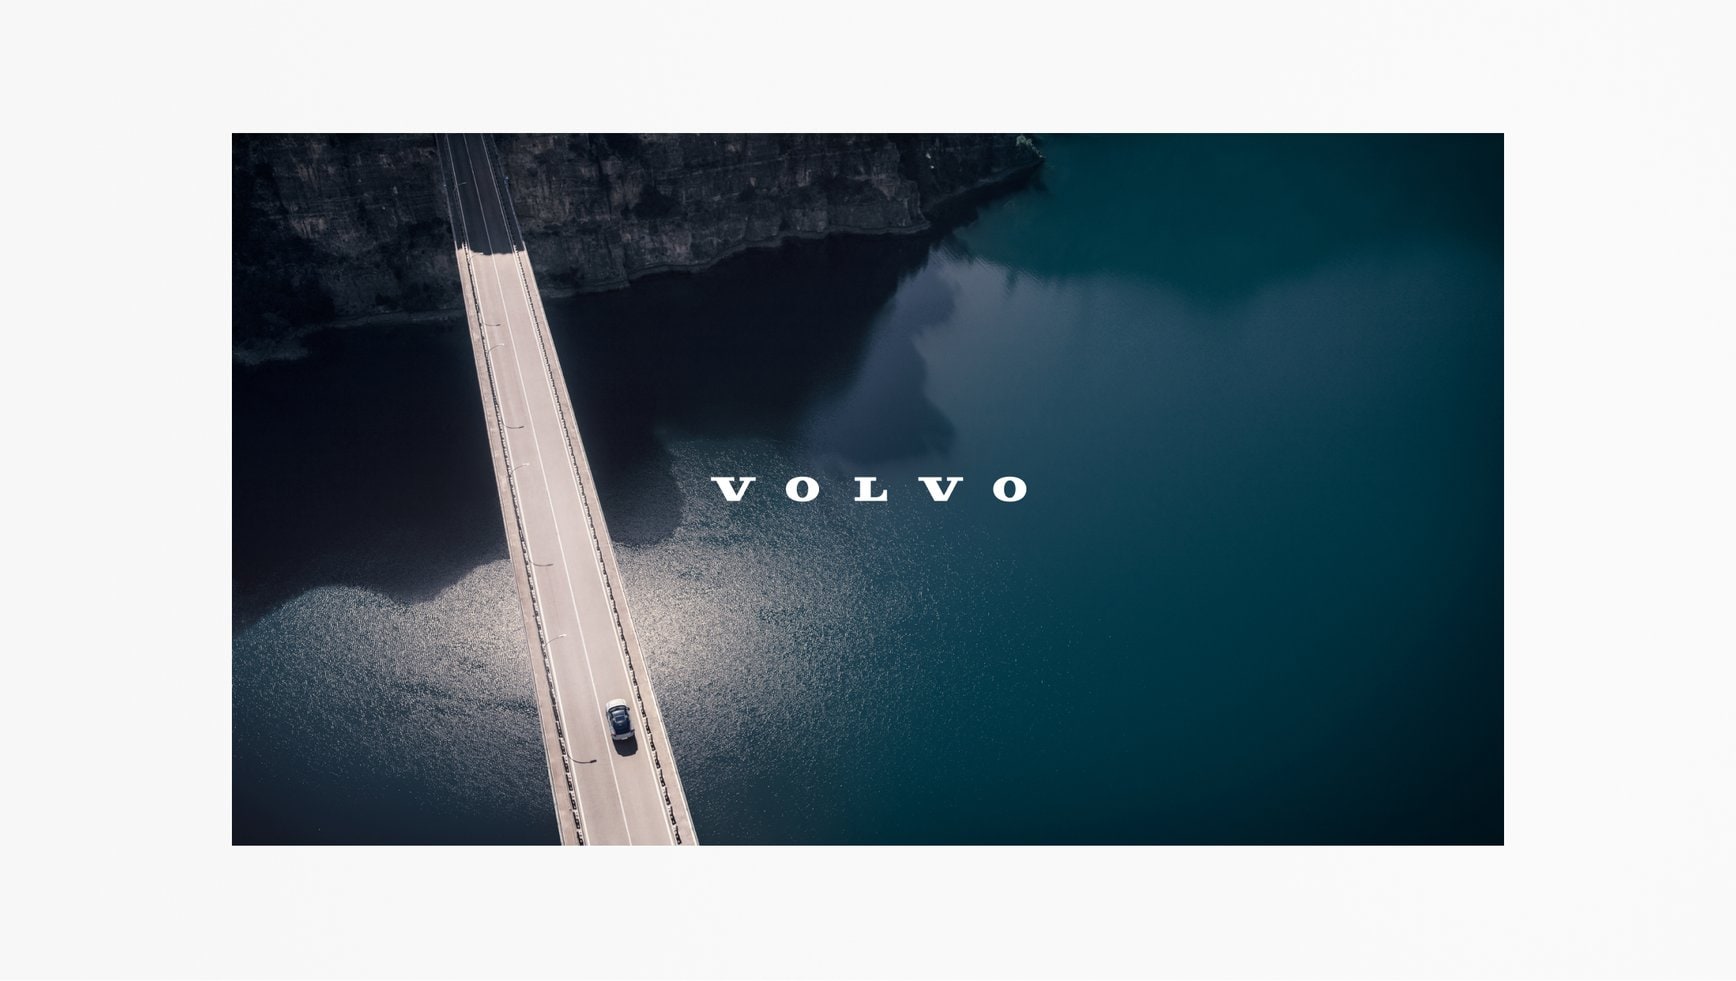 This aerial image represents an end of video context (in a widescreen format). The photo is of a car driving over a suspension bridge, with a body of water underneath. The Volvo Spread Word Mark is positioned in the centre of the photo. It contrasts well, being set in white, on the dark water in the background.